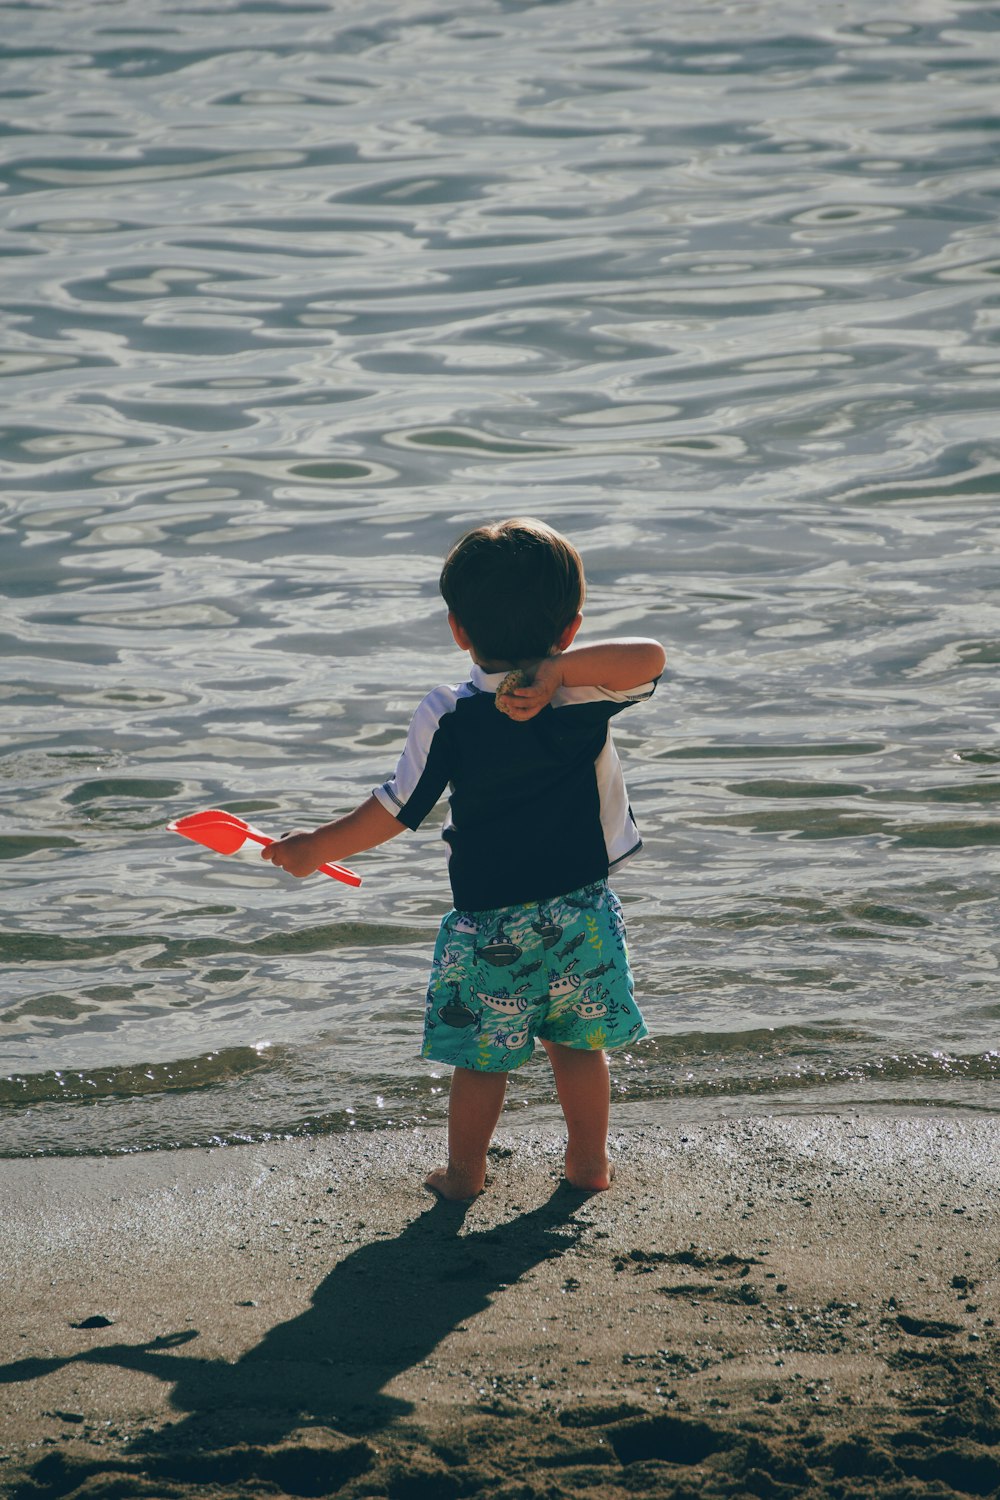 a young boy standing on top of a beach next to a body of water